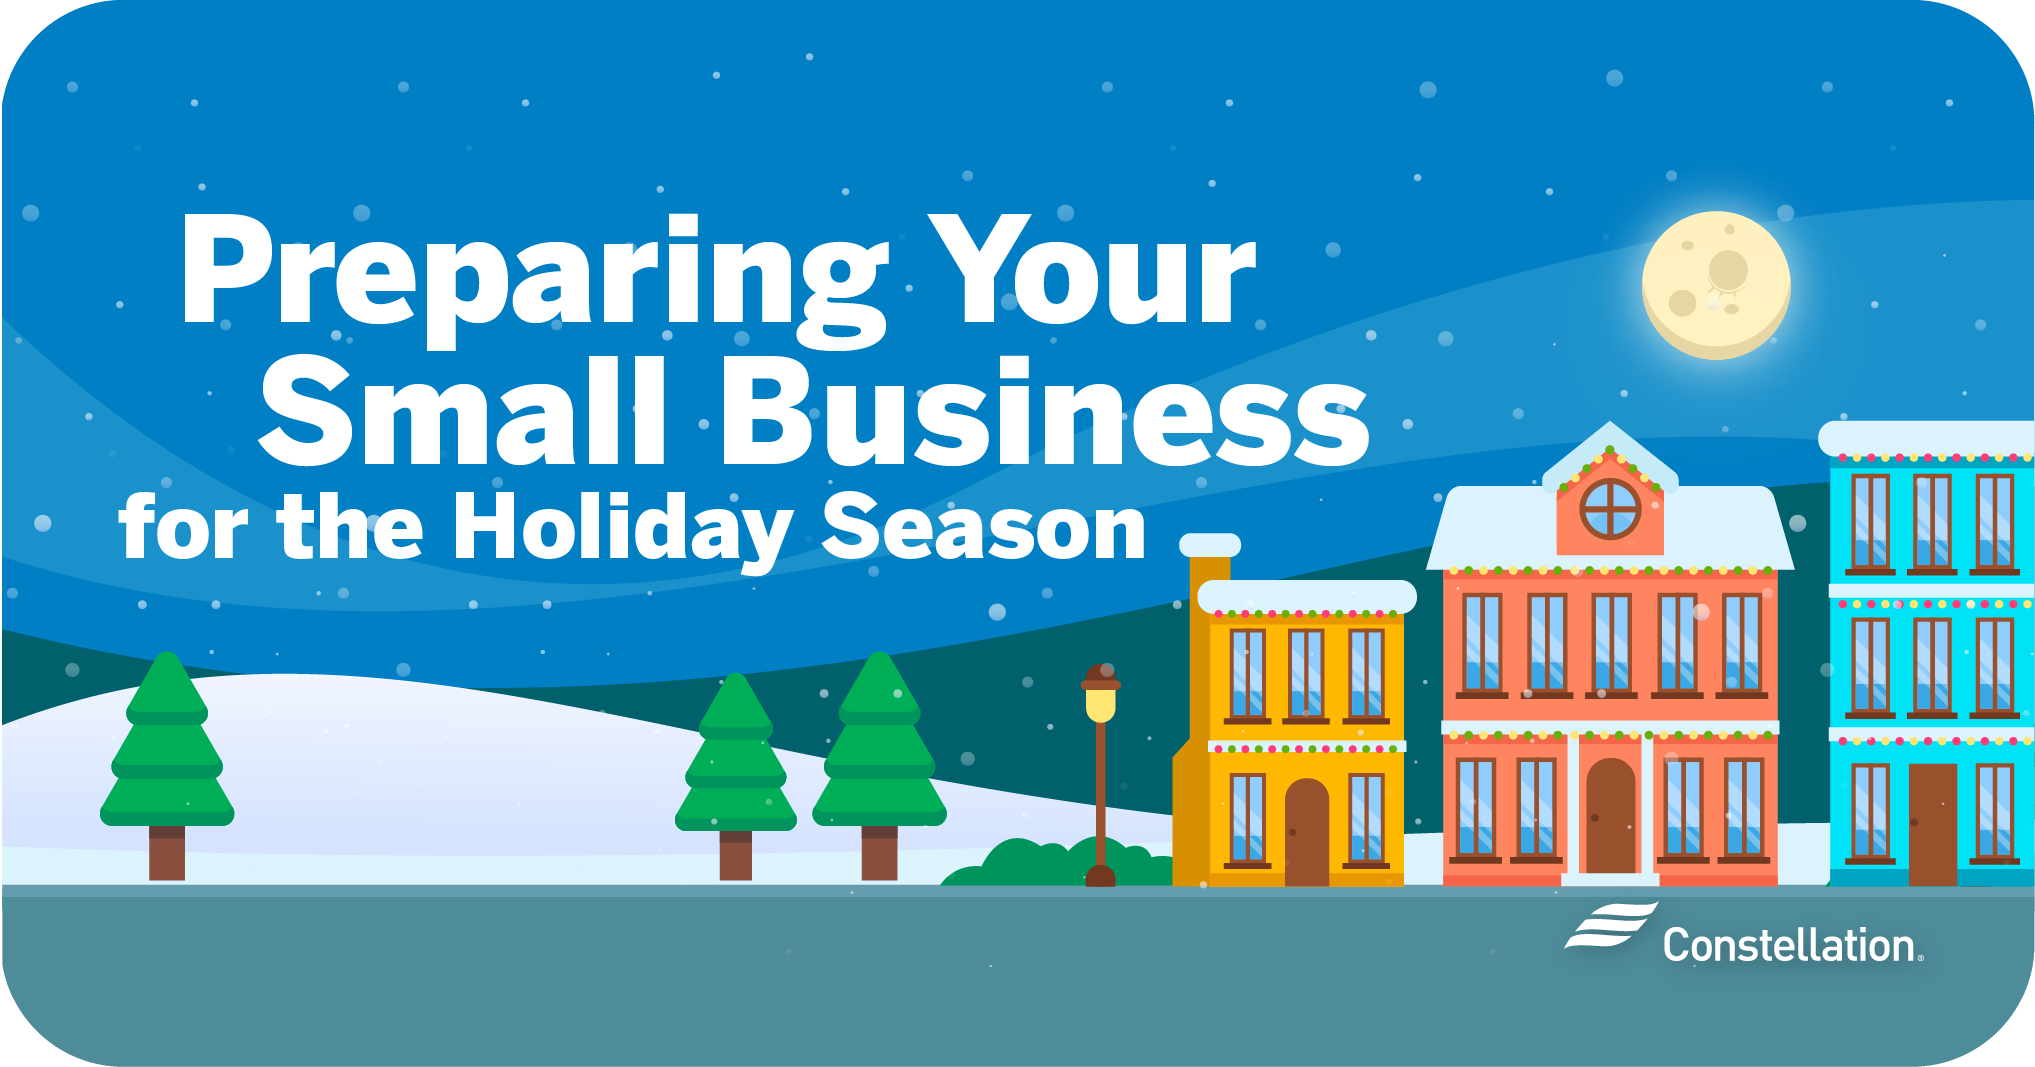 Preparing your small business for the holiday season.